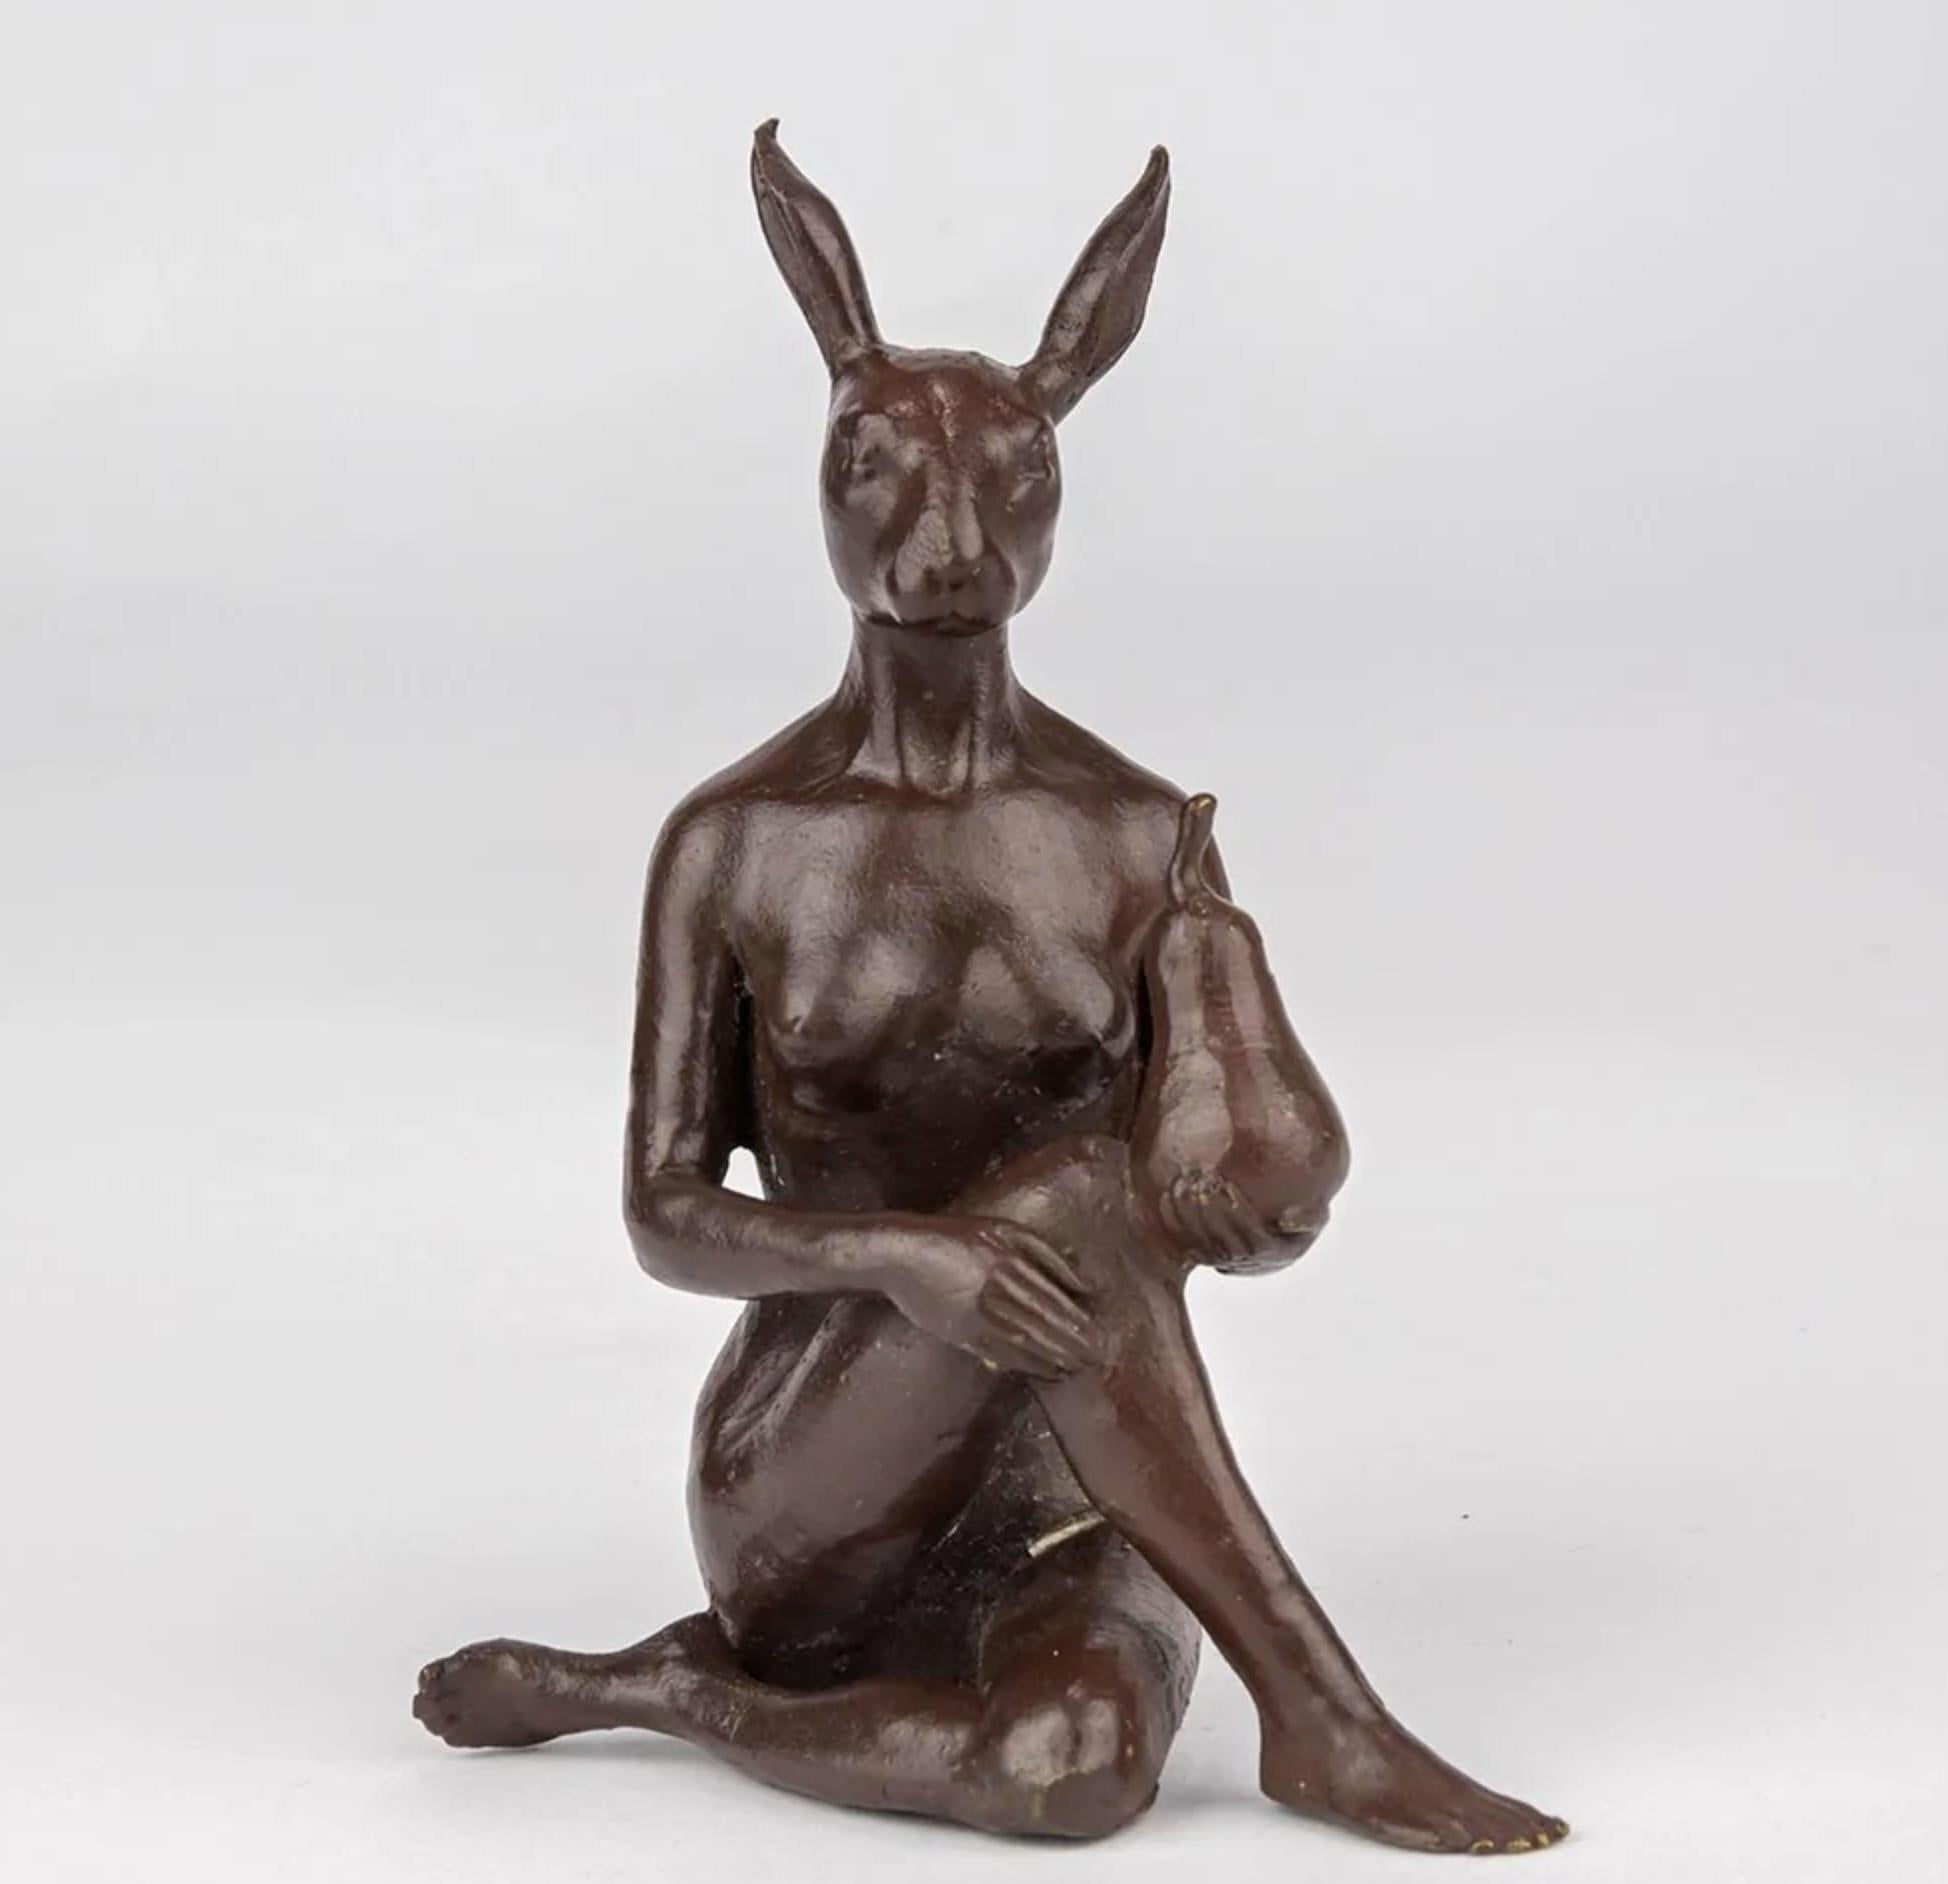 Authentic Bronze The Pearfect Rabbit Sculpture by Gillie and Marc